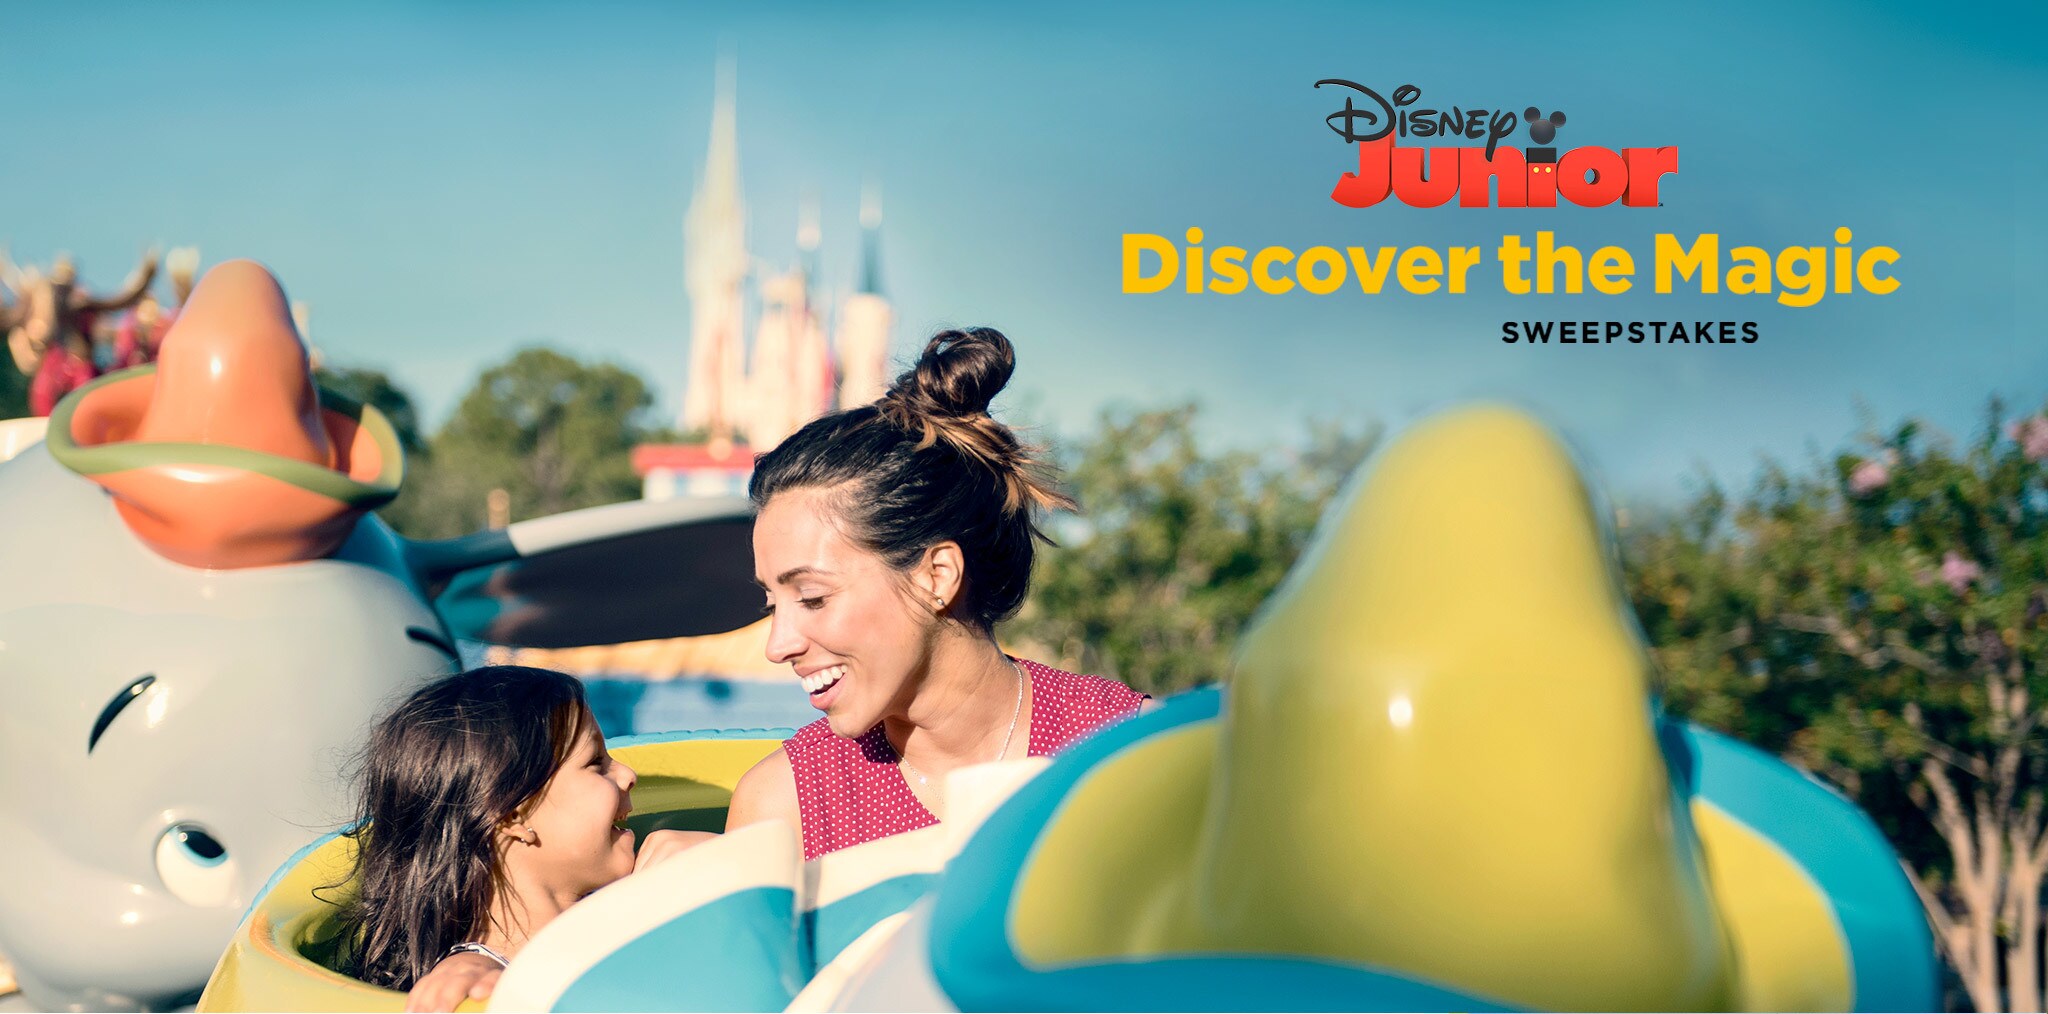 Disney Jr Discover the Magic Sweepstakes